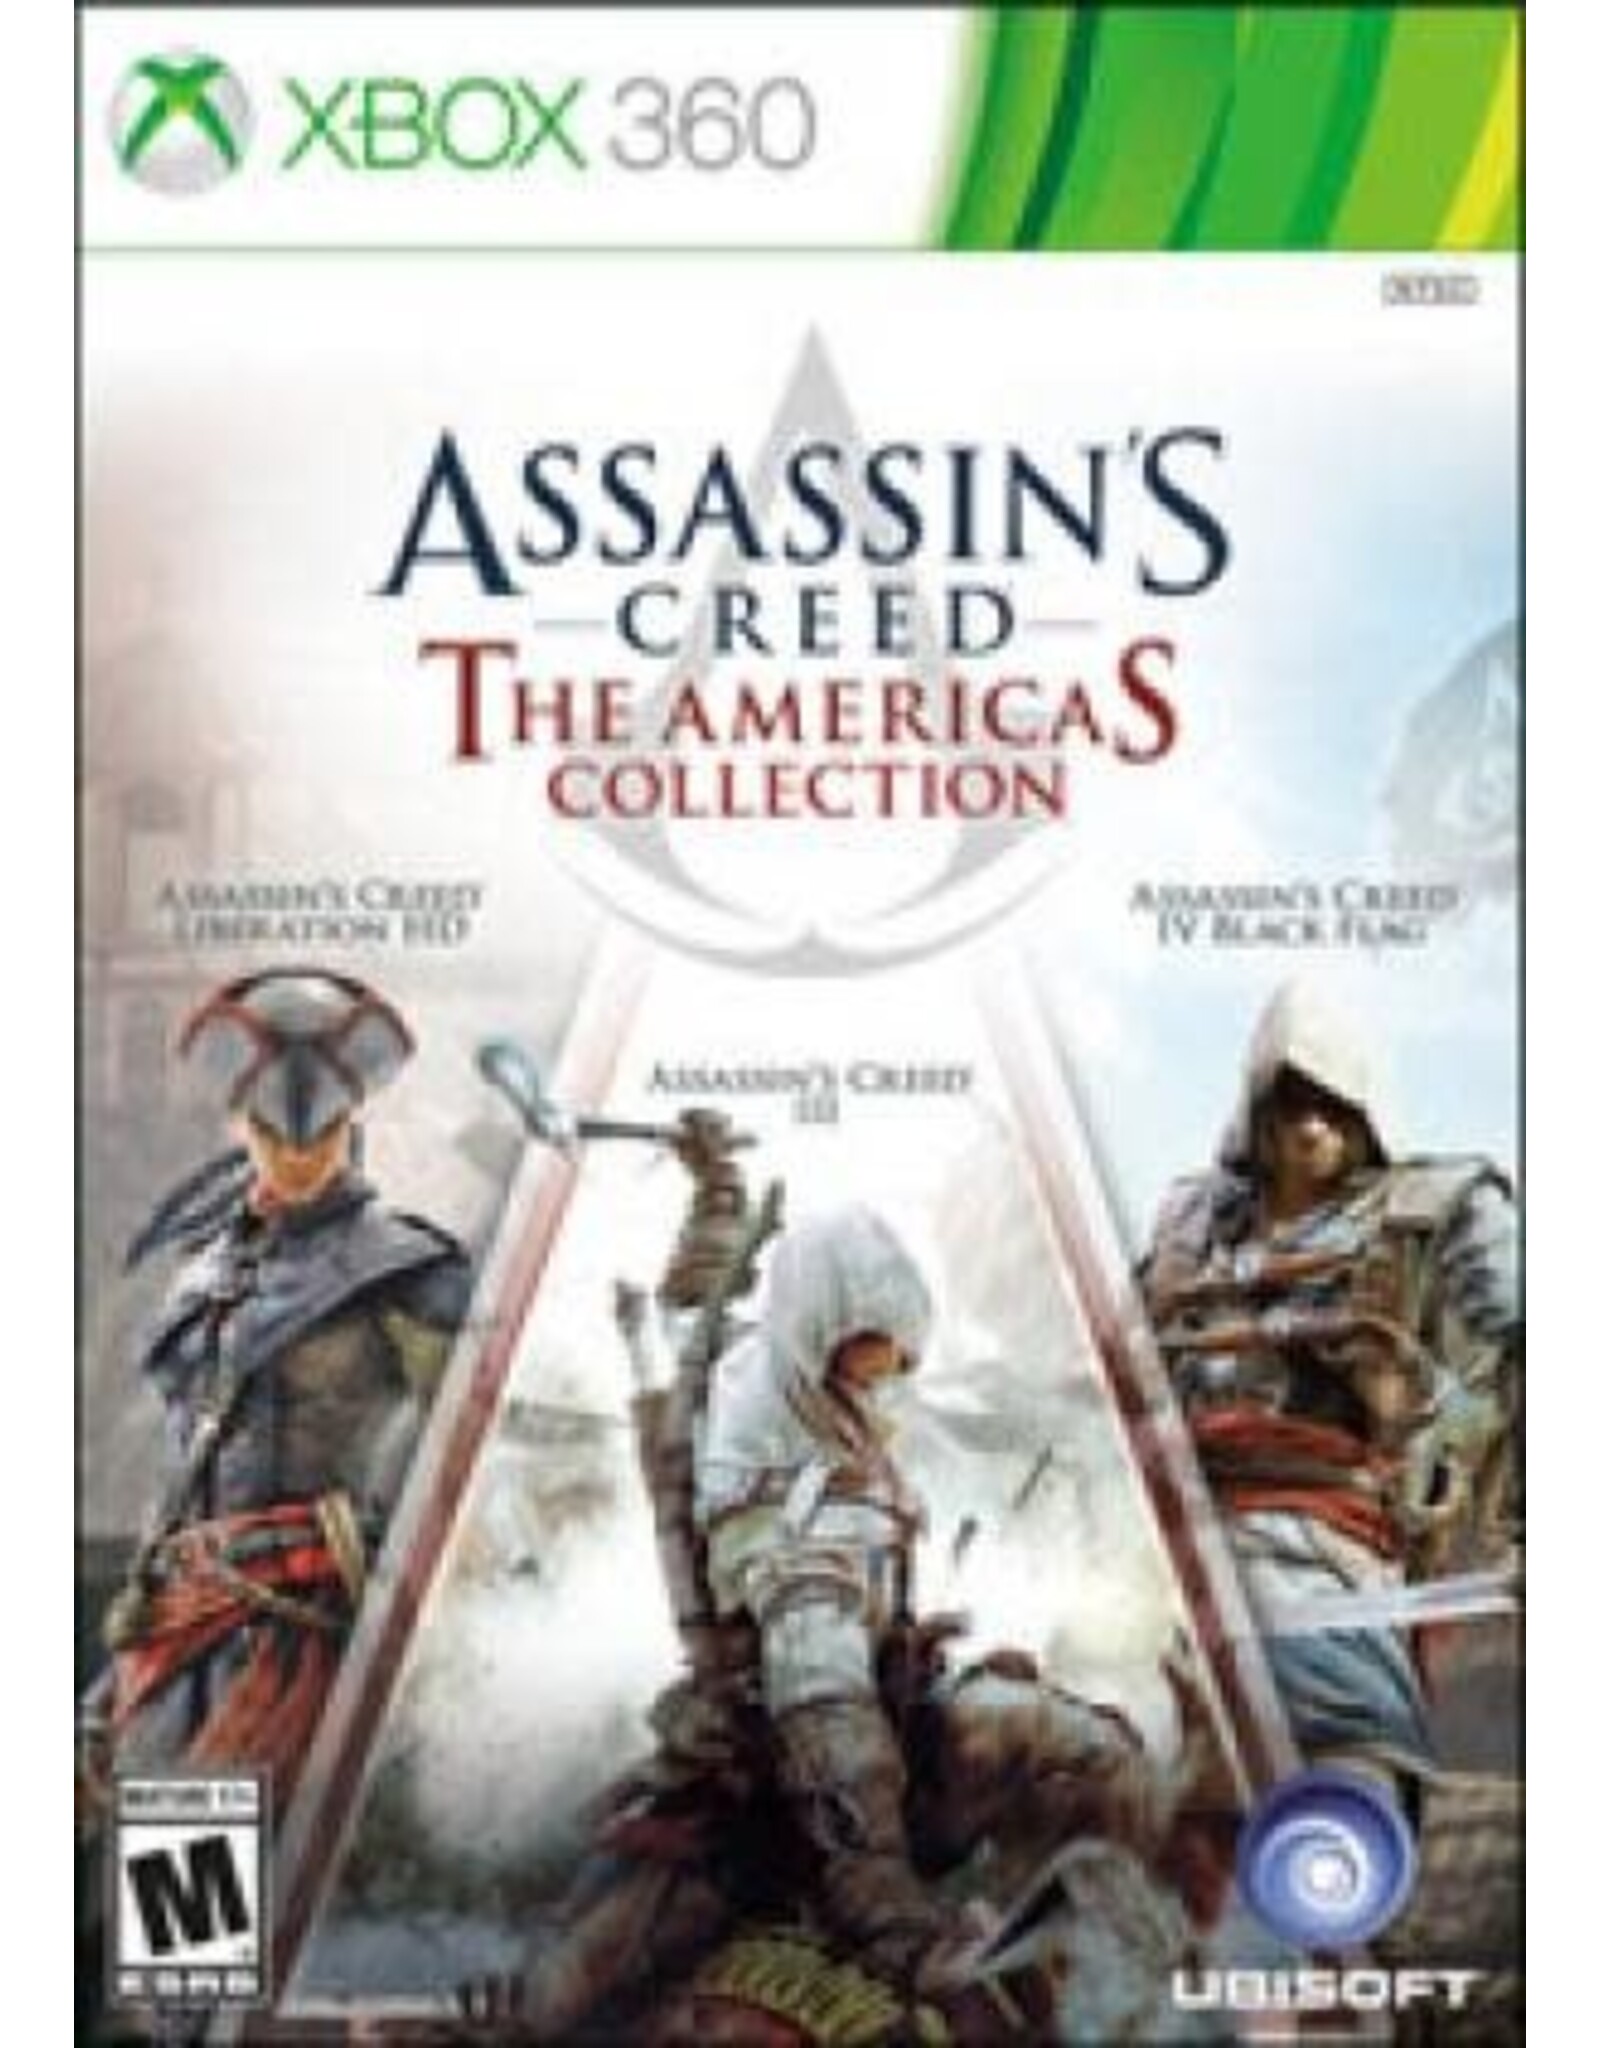 Xbox 360 Assassin's Creed: The Americas Collection (CiB, III and IV Only - No DLC)